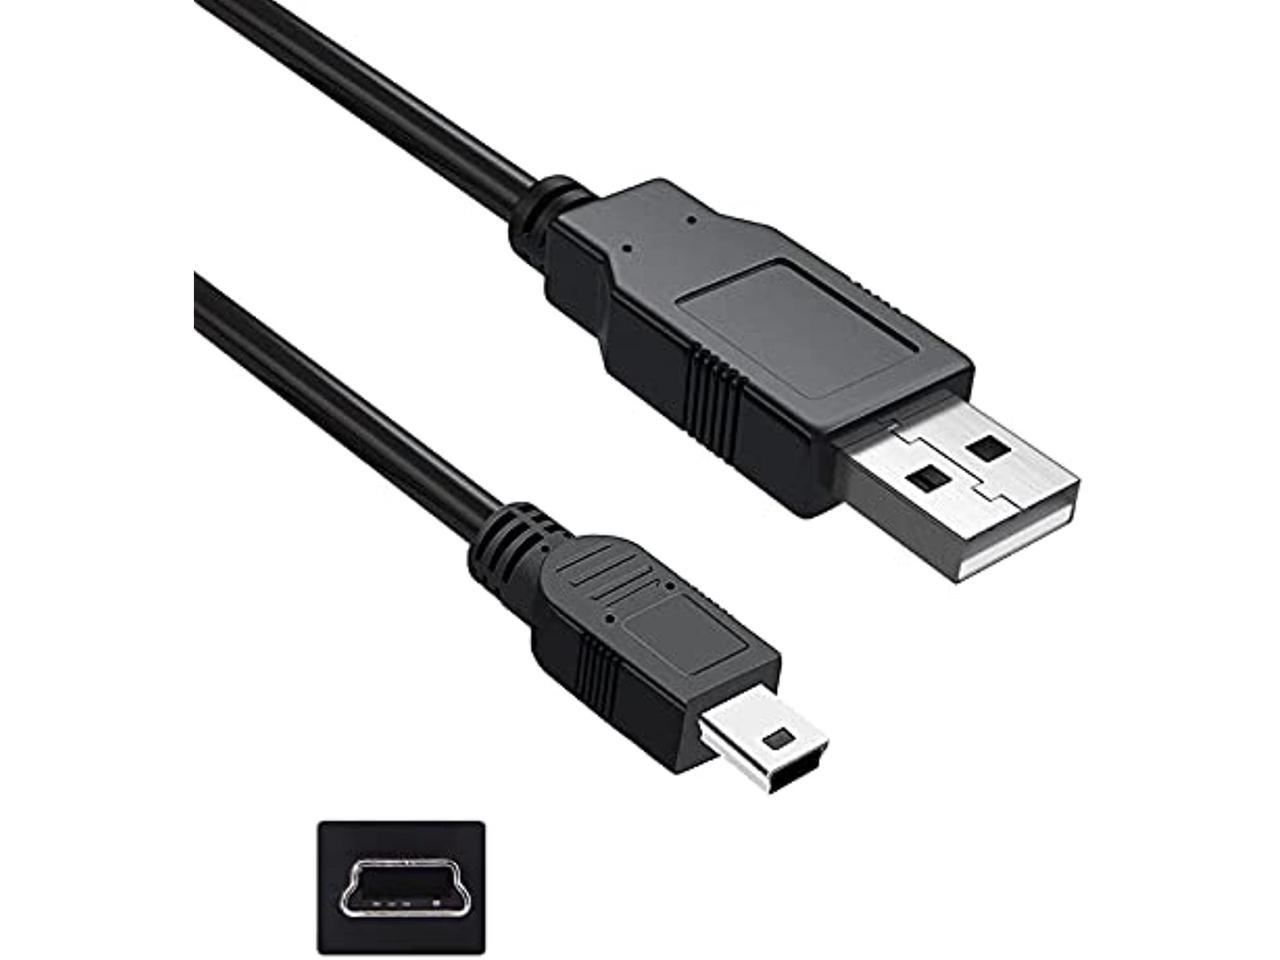 USB Power Charger Cable PC Data SYNC Cord For WD My Passport Mac WDBKKF0020BSL 